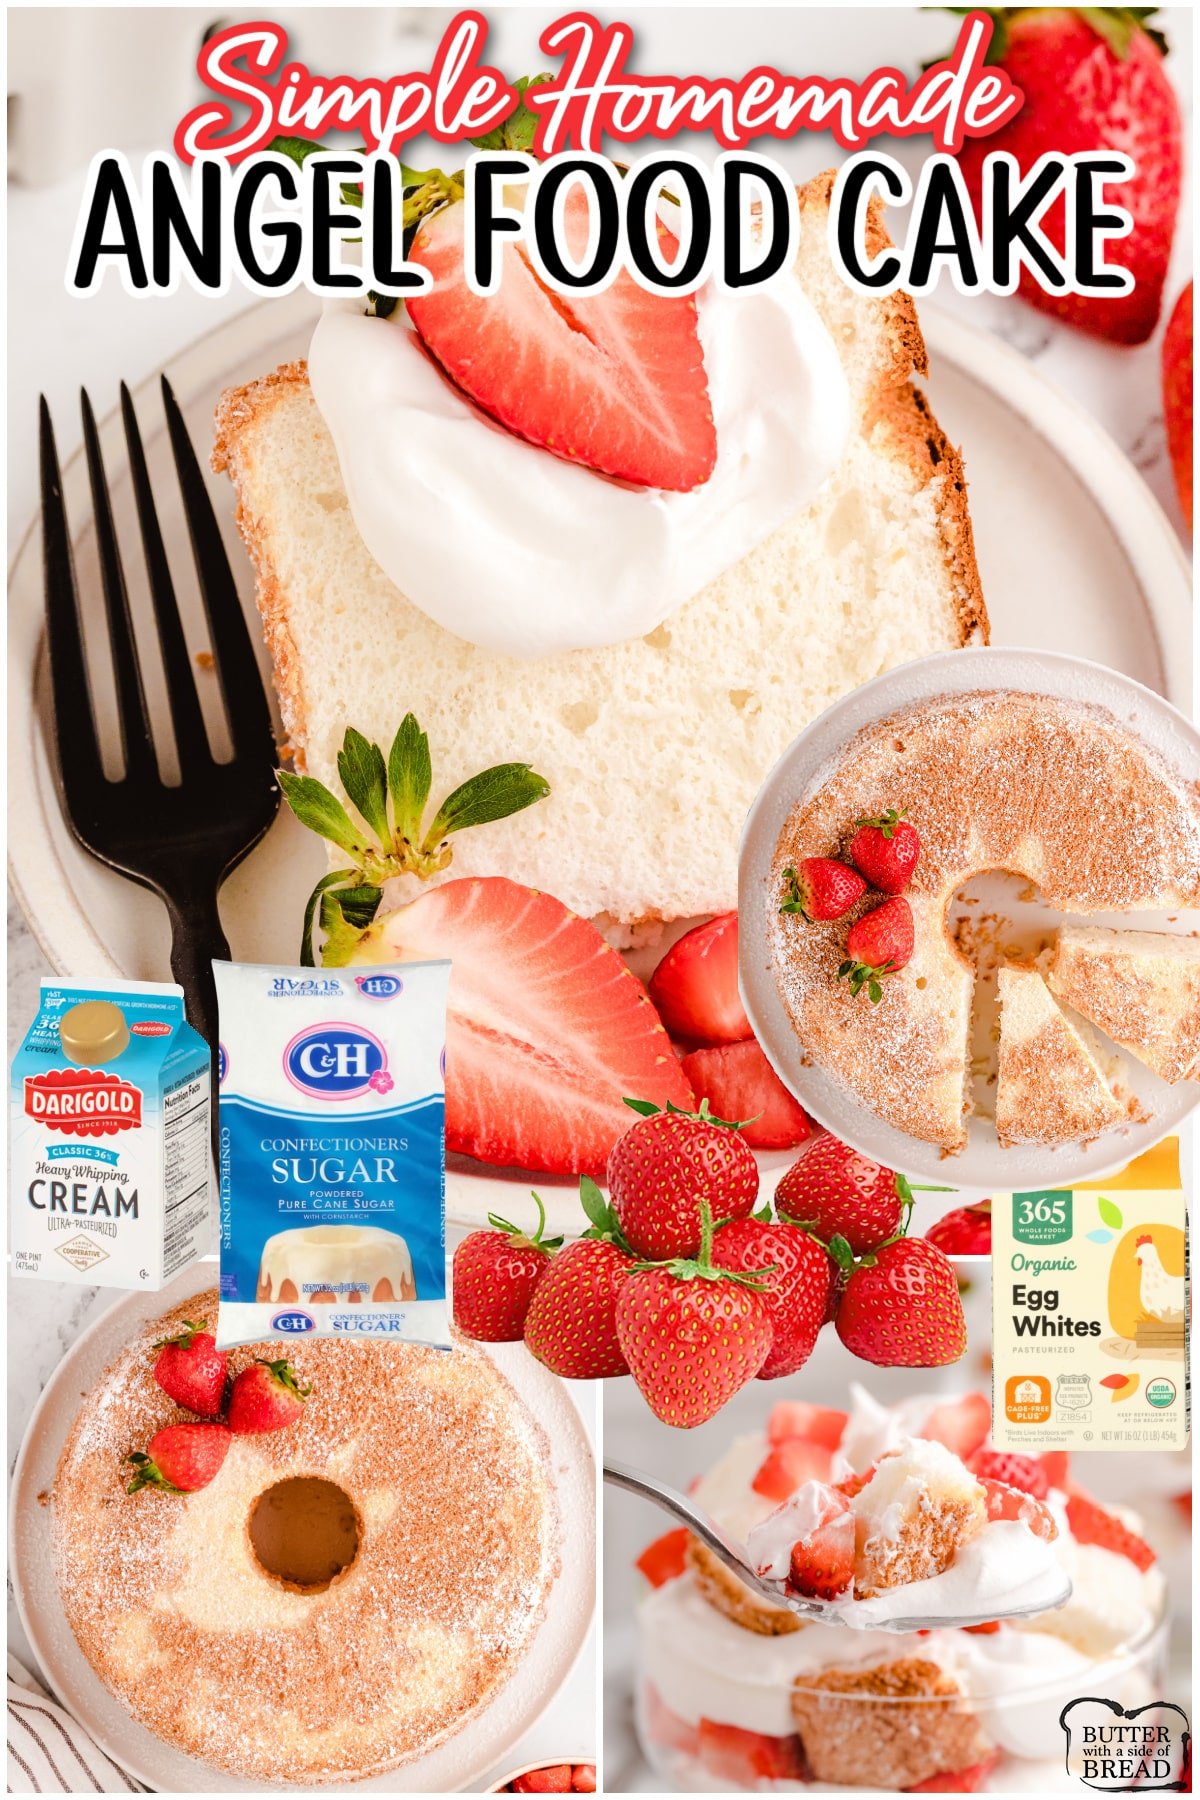 Angel Food Cake with Strawberries made with a from-scratch light & airy cake recipe & topped with sweetened berries & fresh cream. Perfect strawberry dessert! 